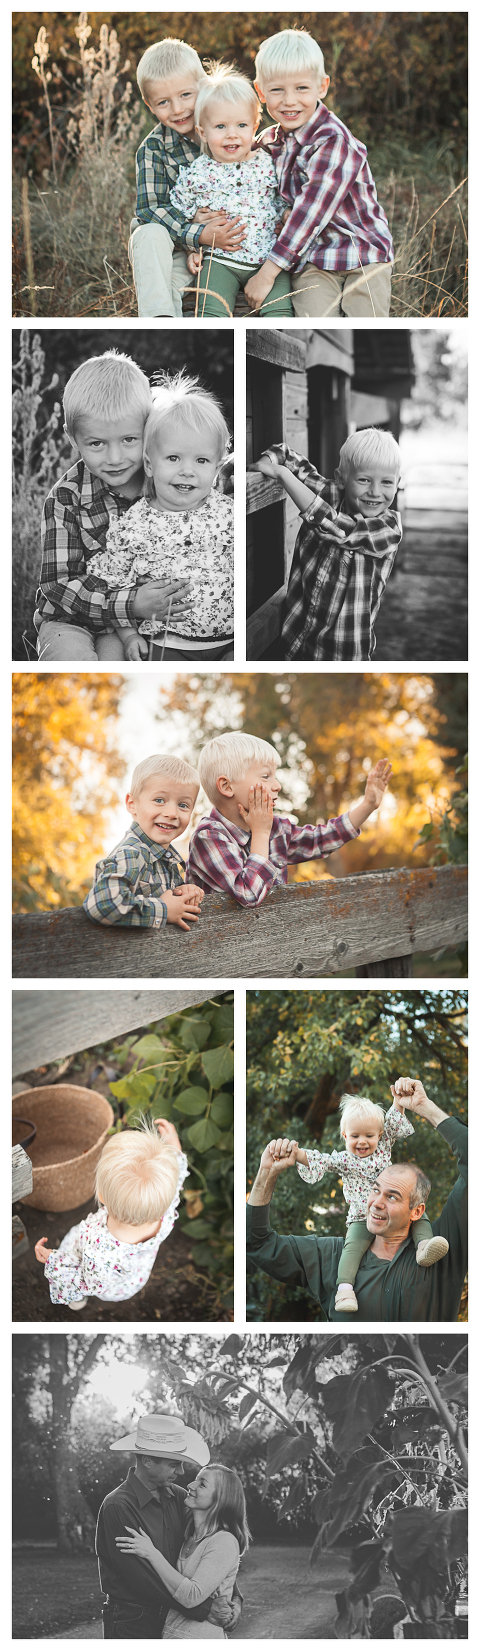 Connelly Lifestyle Family Session by Hailey Haberman 2018 in Ellensburg WA